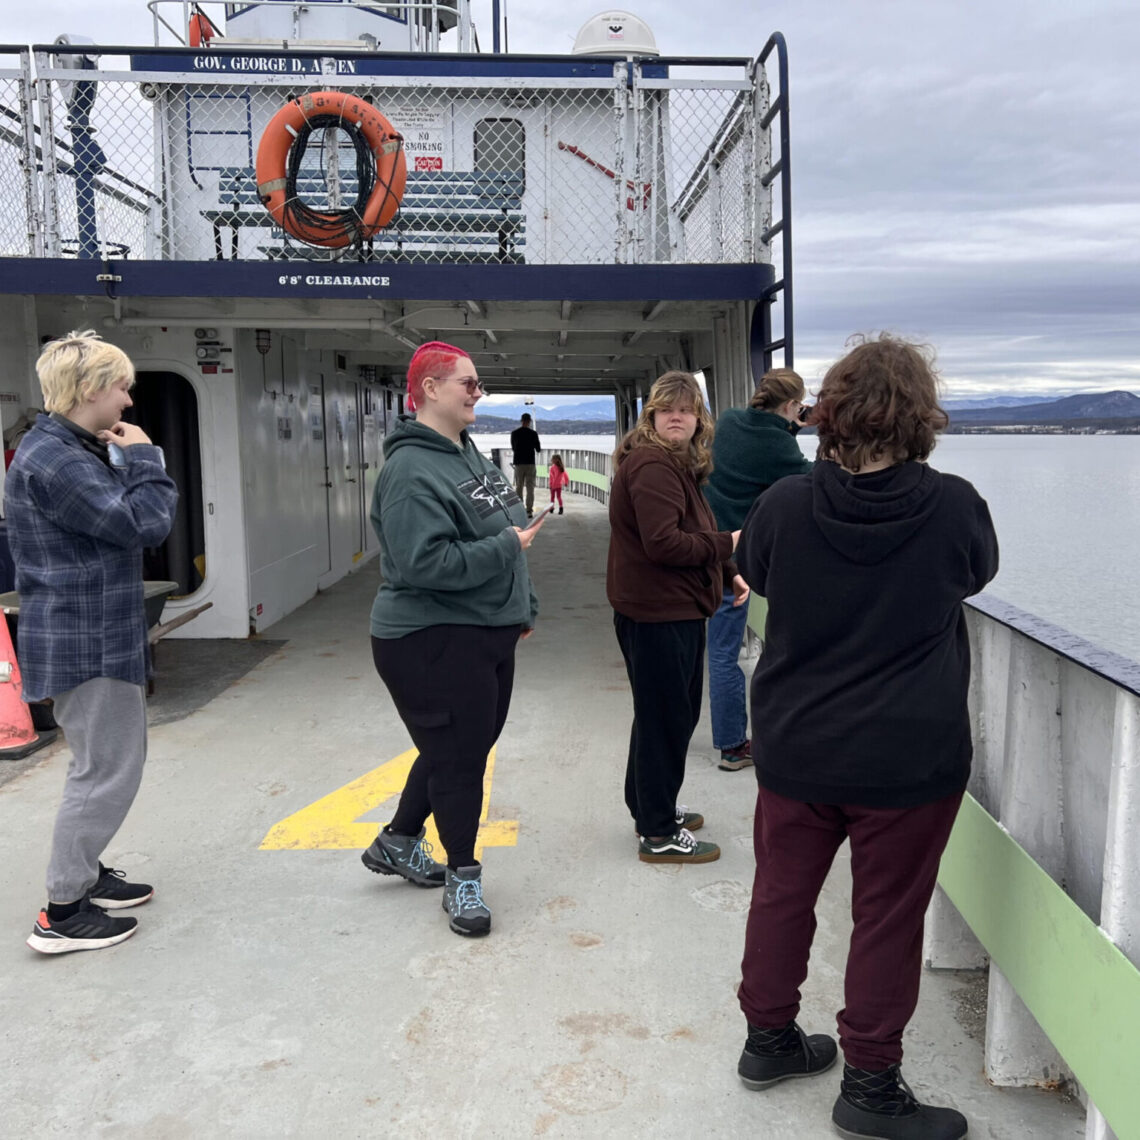 Students and staff enjoy the ferry trip across Lake Champlain.